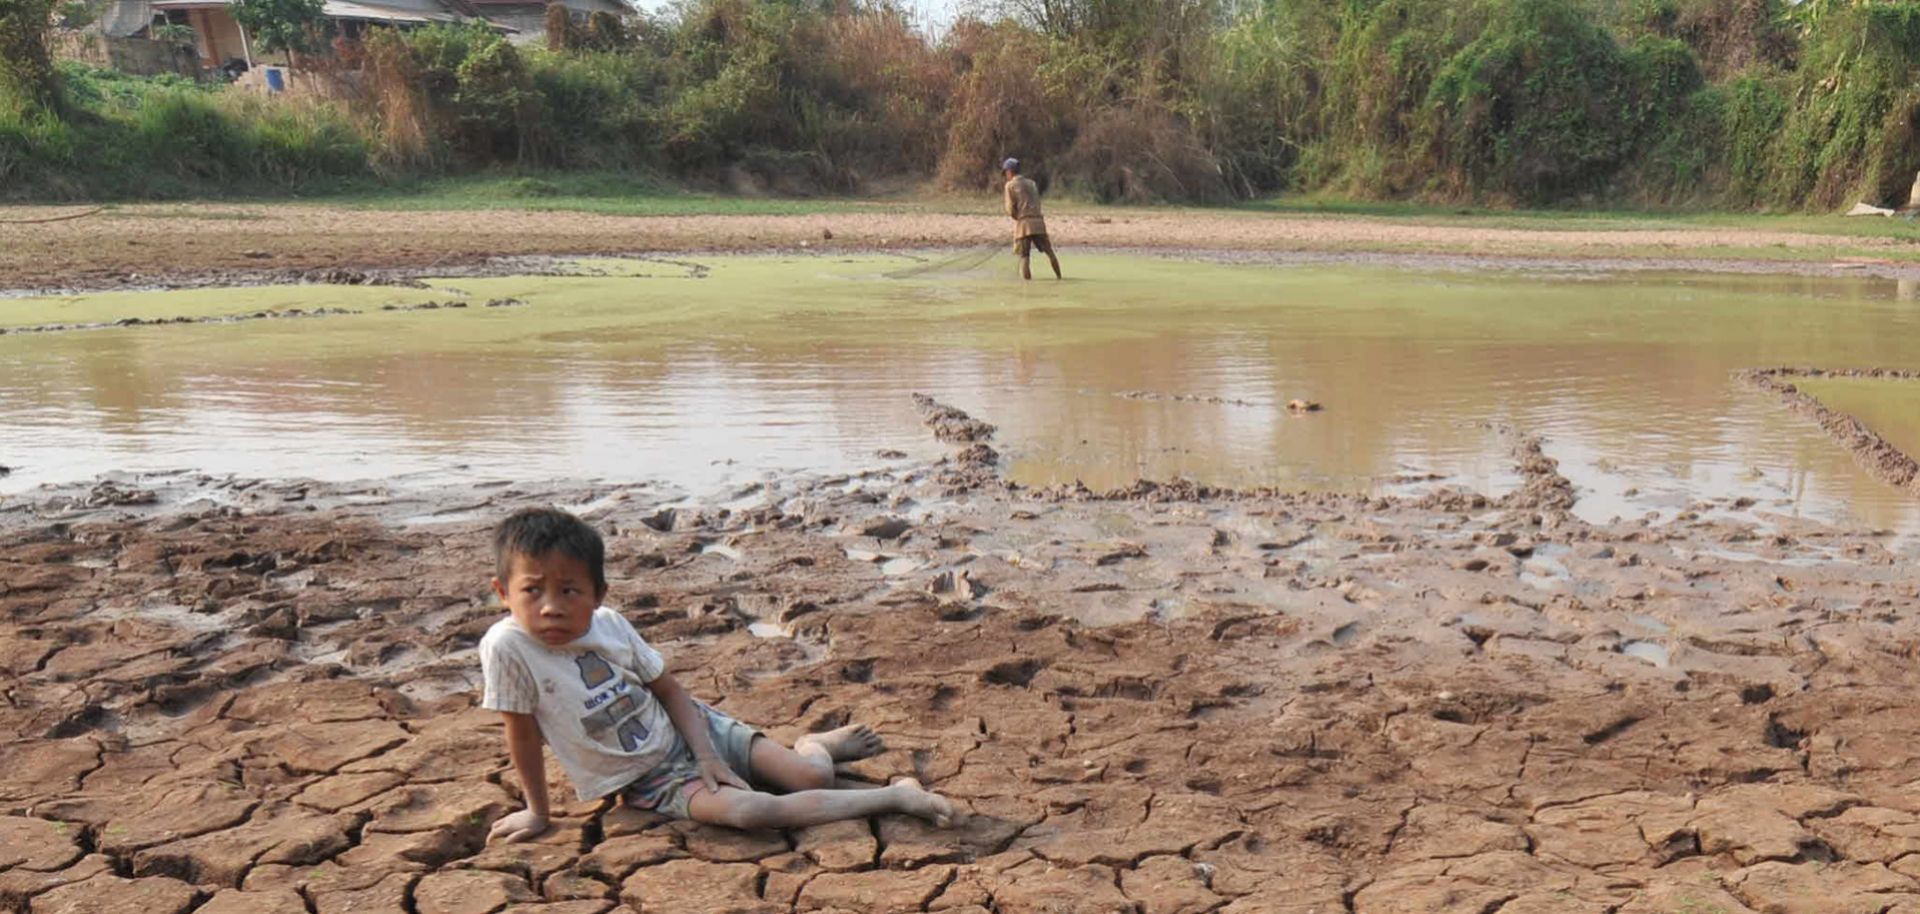 A son waits while his father fishes in their family's rice field outside the Laotian capital Vientiane, near the Mekong River, on March 27, 2010. Severe droughts have depleted the river waters to historic lows, leaving rice fields dry and unproductive.